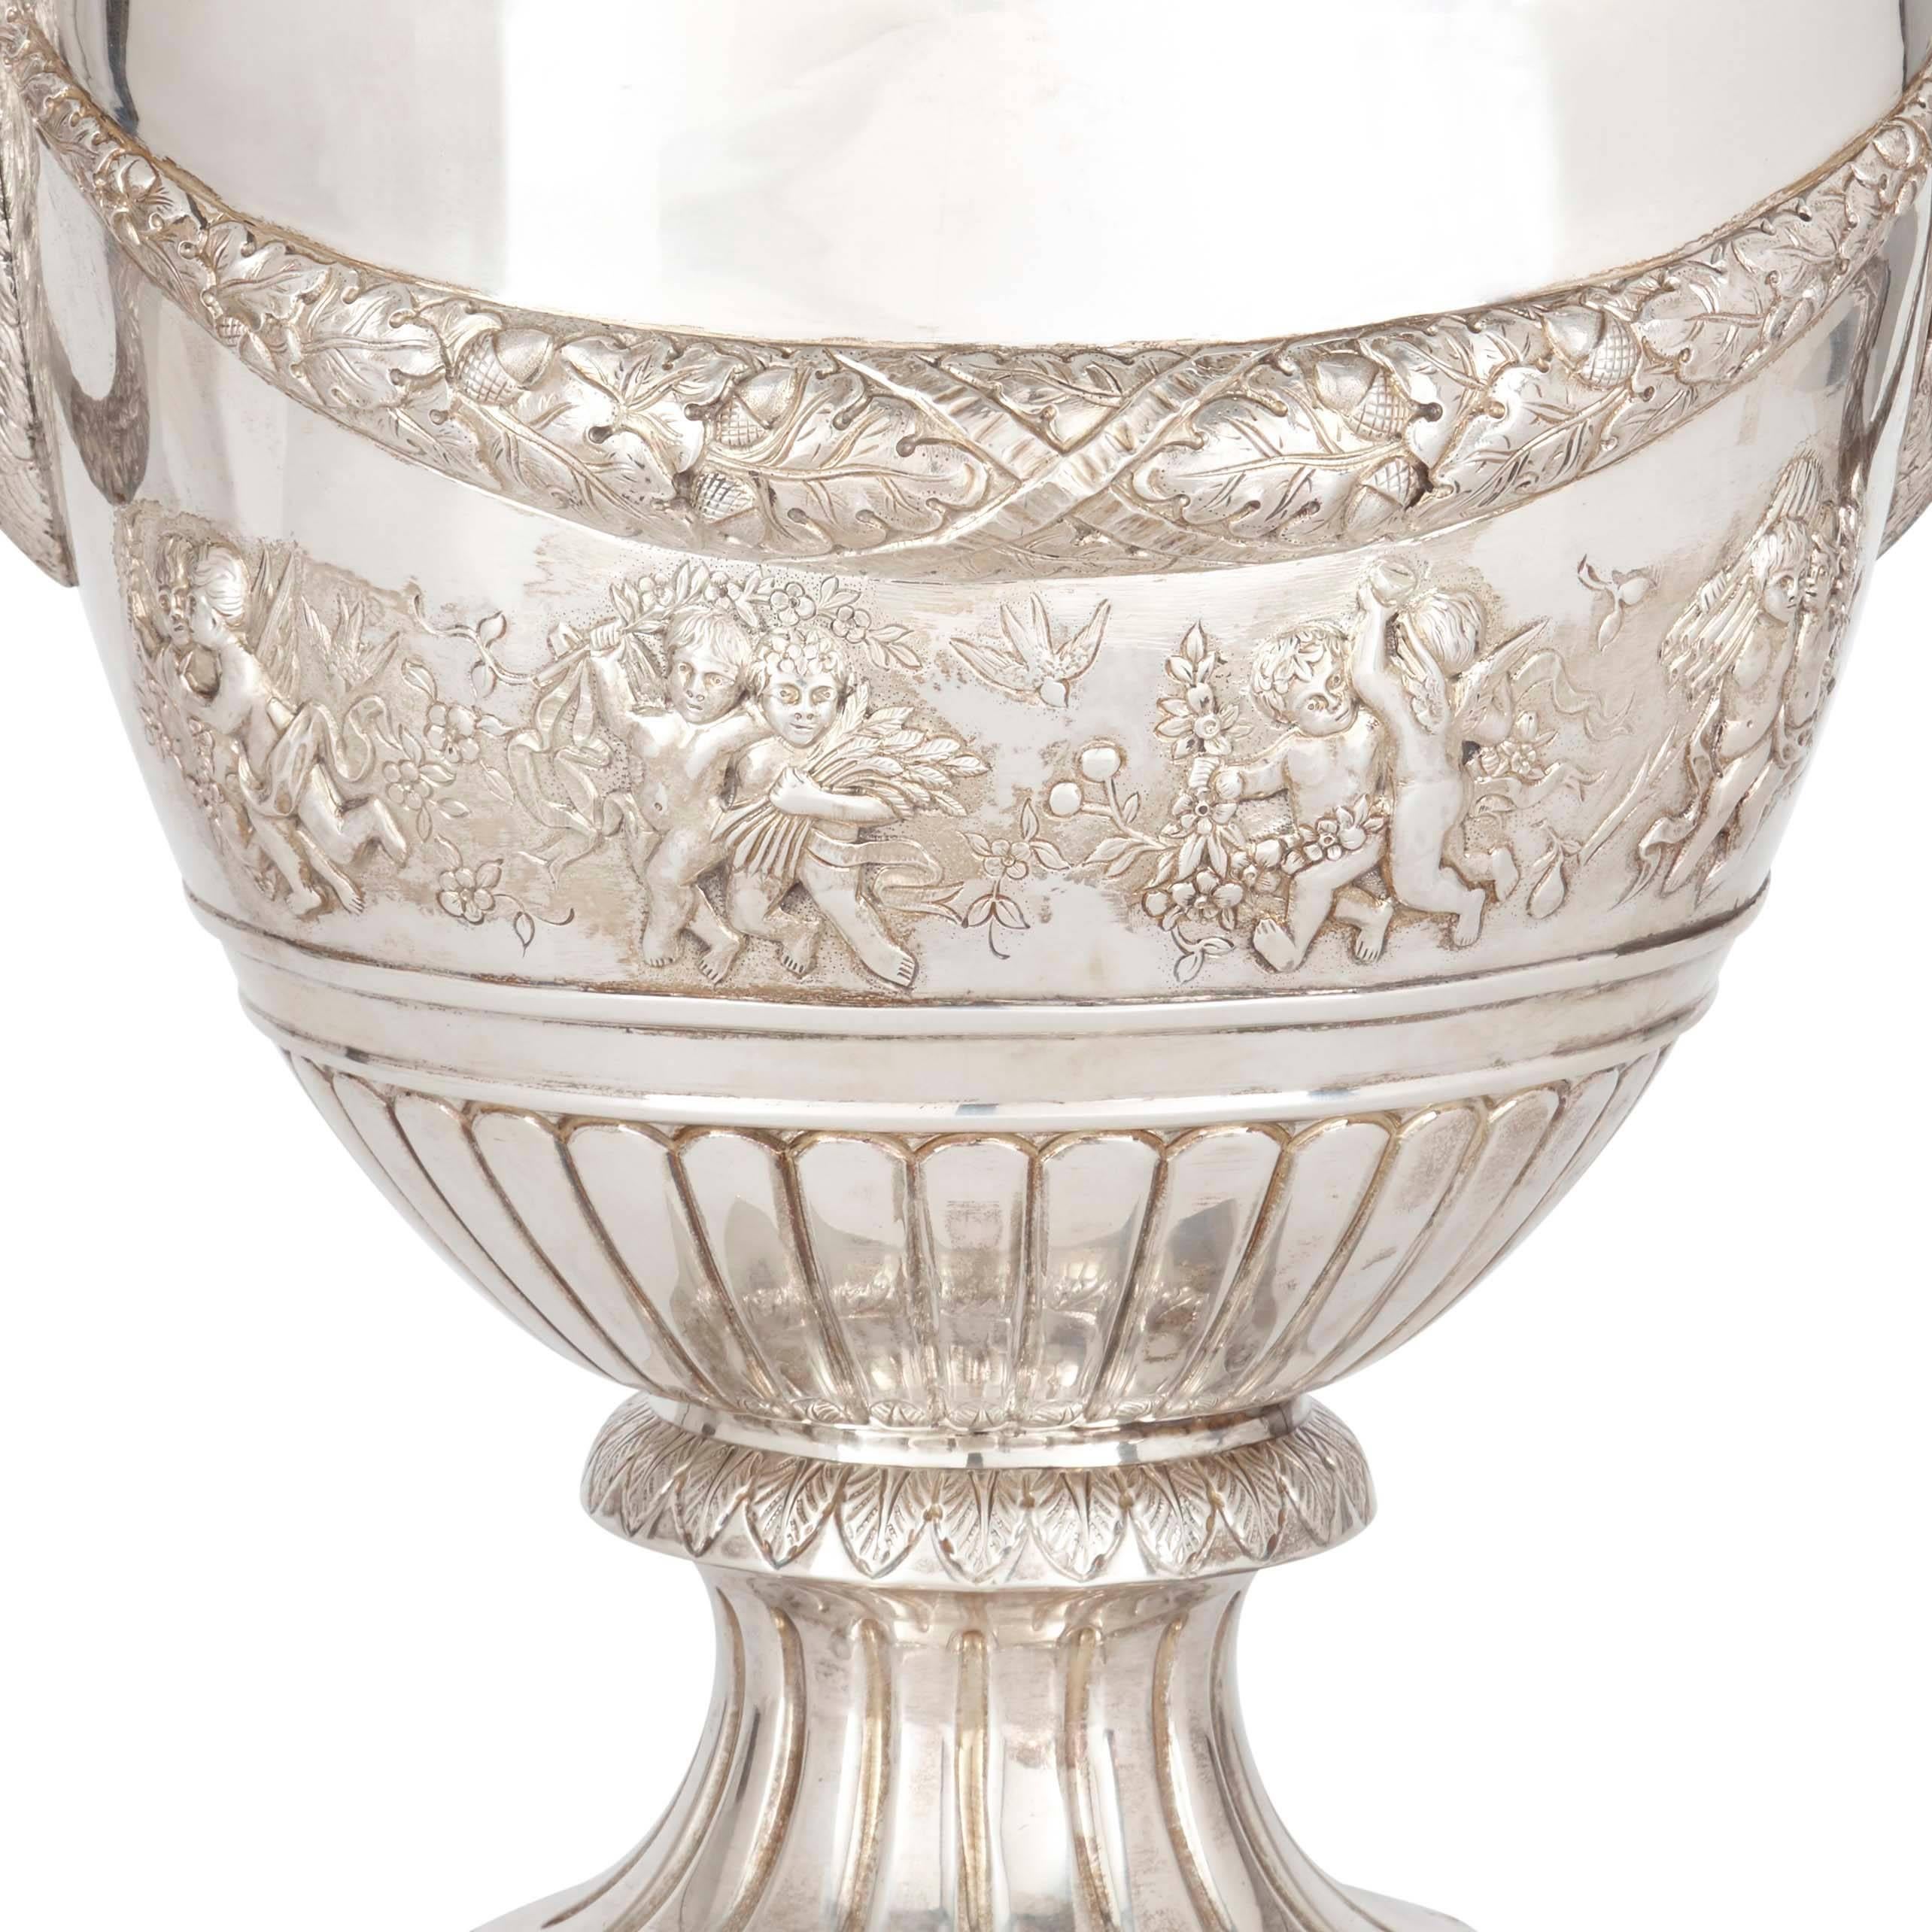 Each with twin handles as ram's heads, decorated with dancing putti, flowers, garlands of flowers and acanthus leaves, with marks to base.

These splendid silver vases would make a sophisticated addition to any interior, imparting a touch of